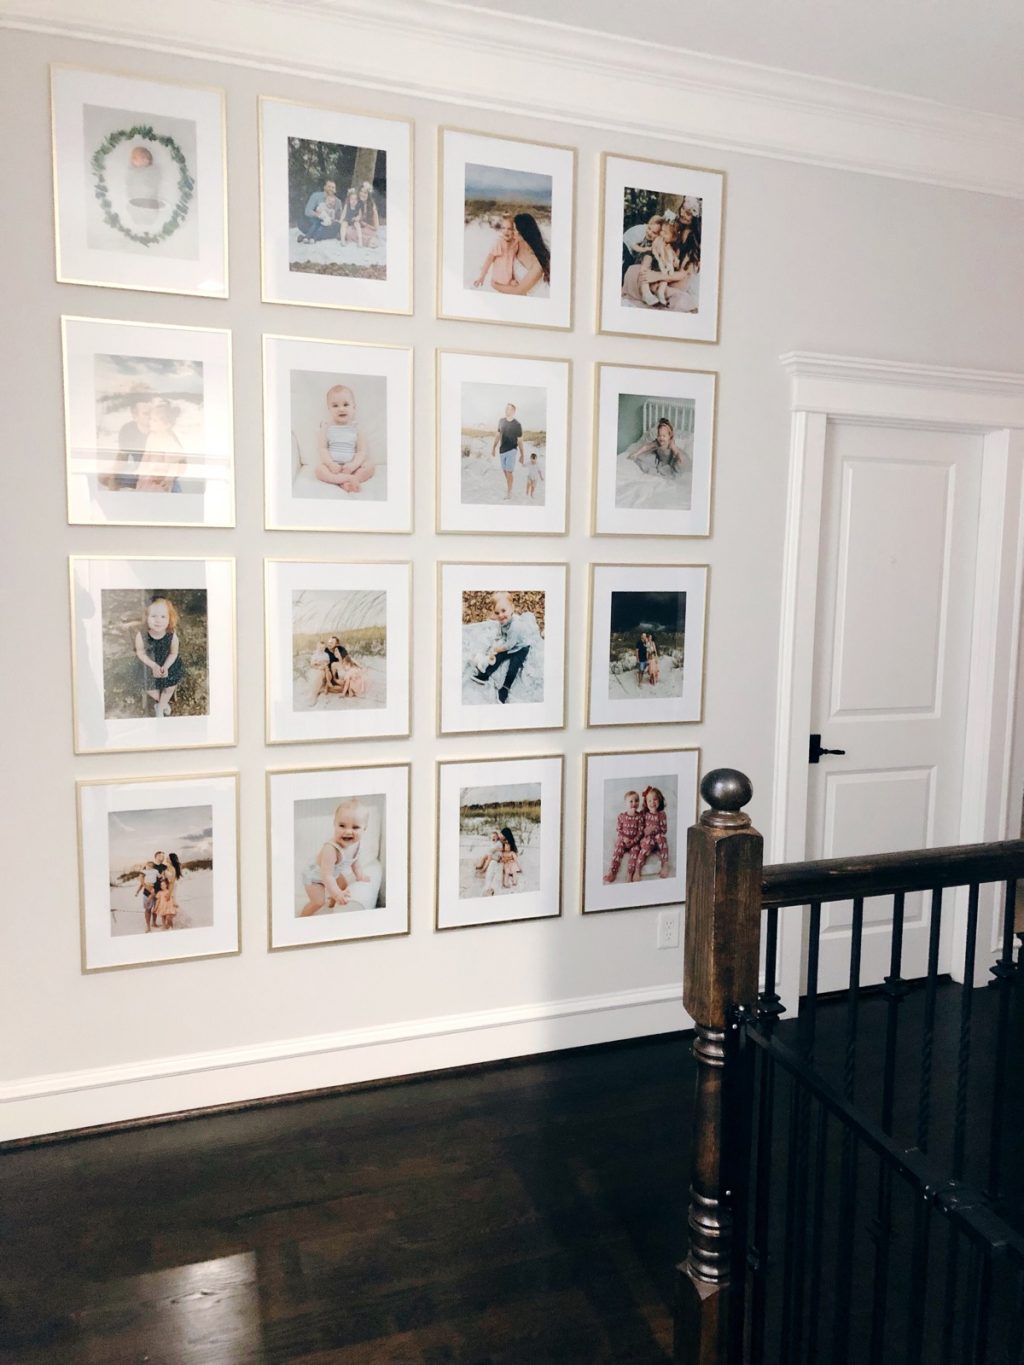 All About Our Gallery Wall - Veronika's Blushing